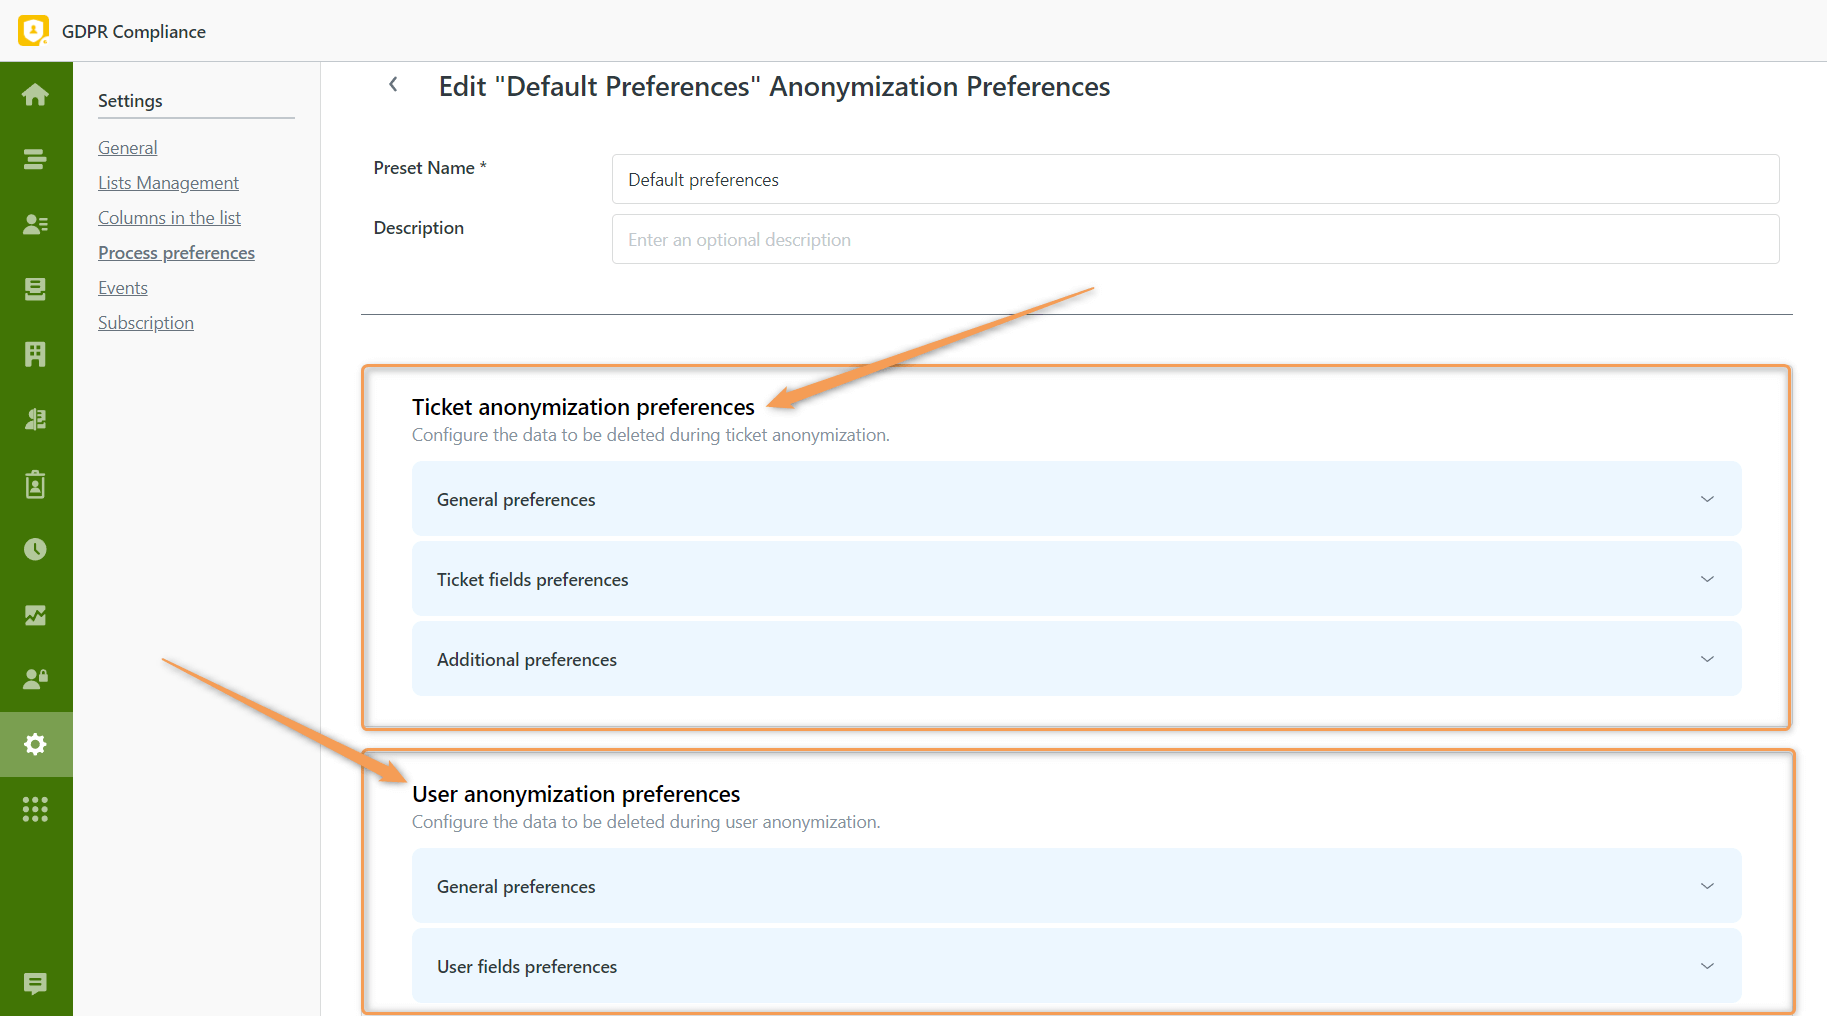 Ticket and User Anonymization Preferences